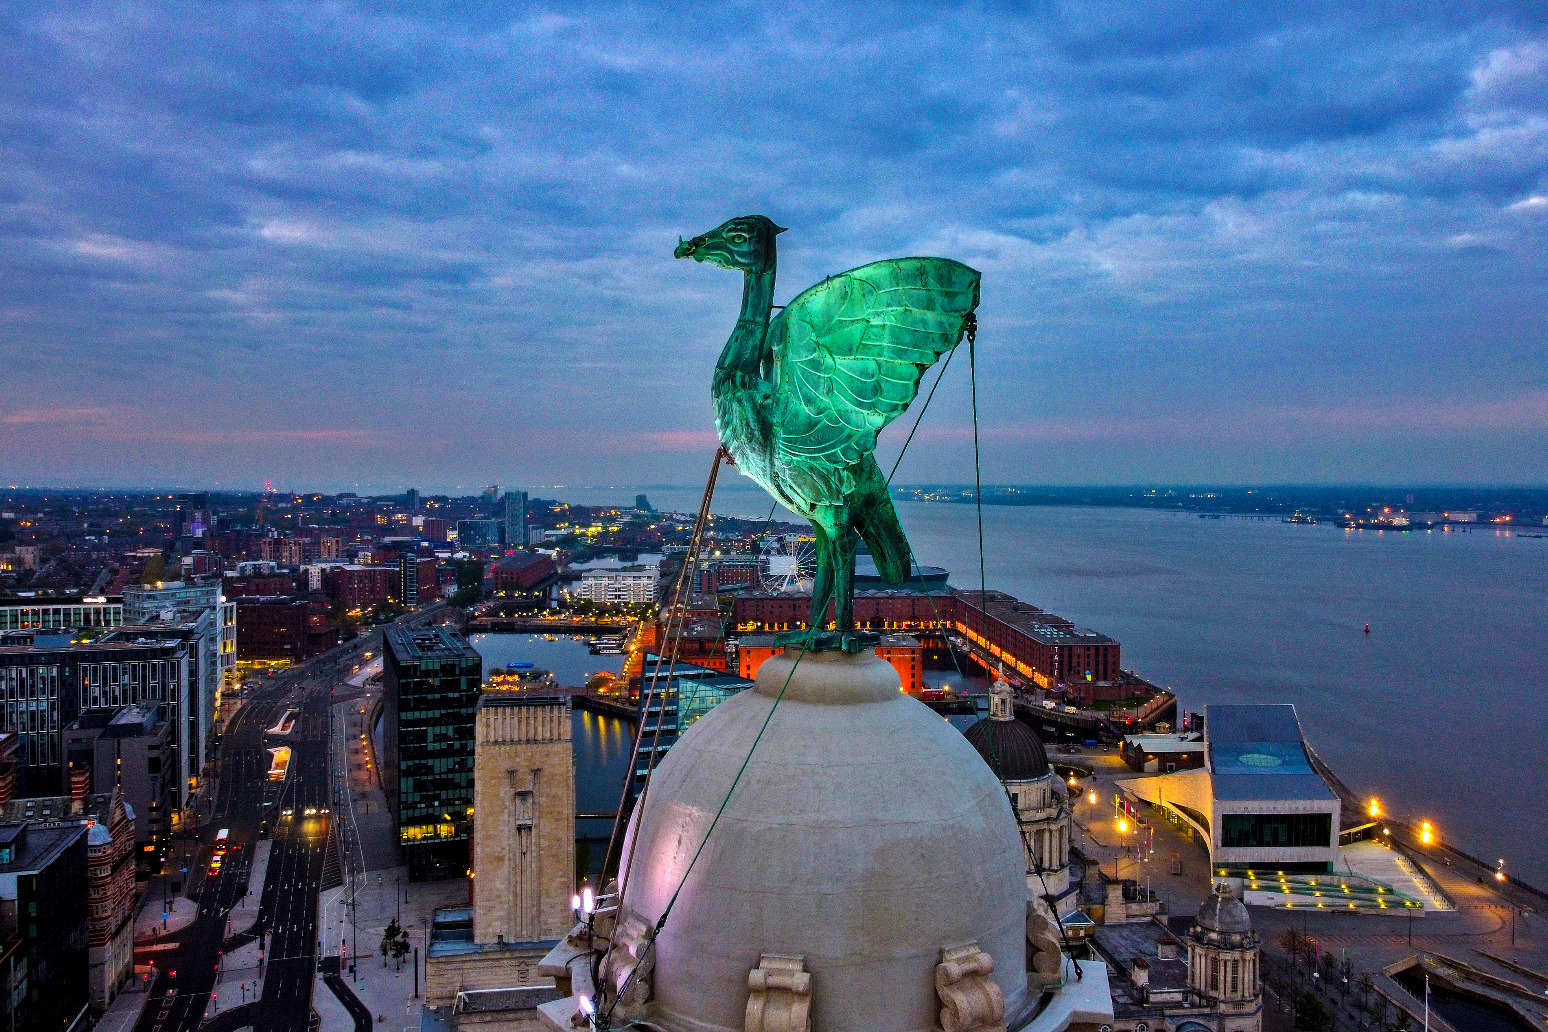 Liverpool to host Eurovision Song Contest in 2023 